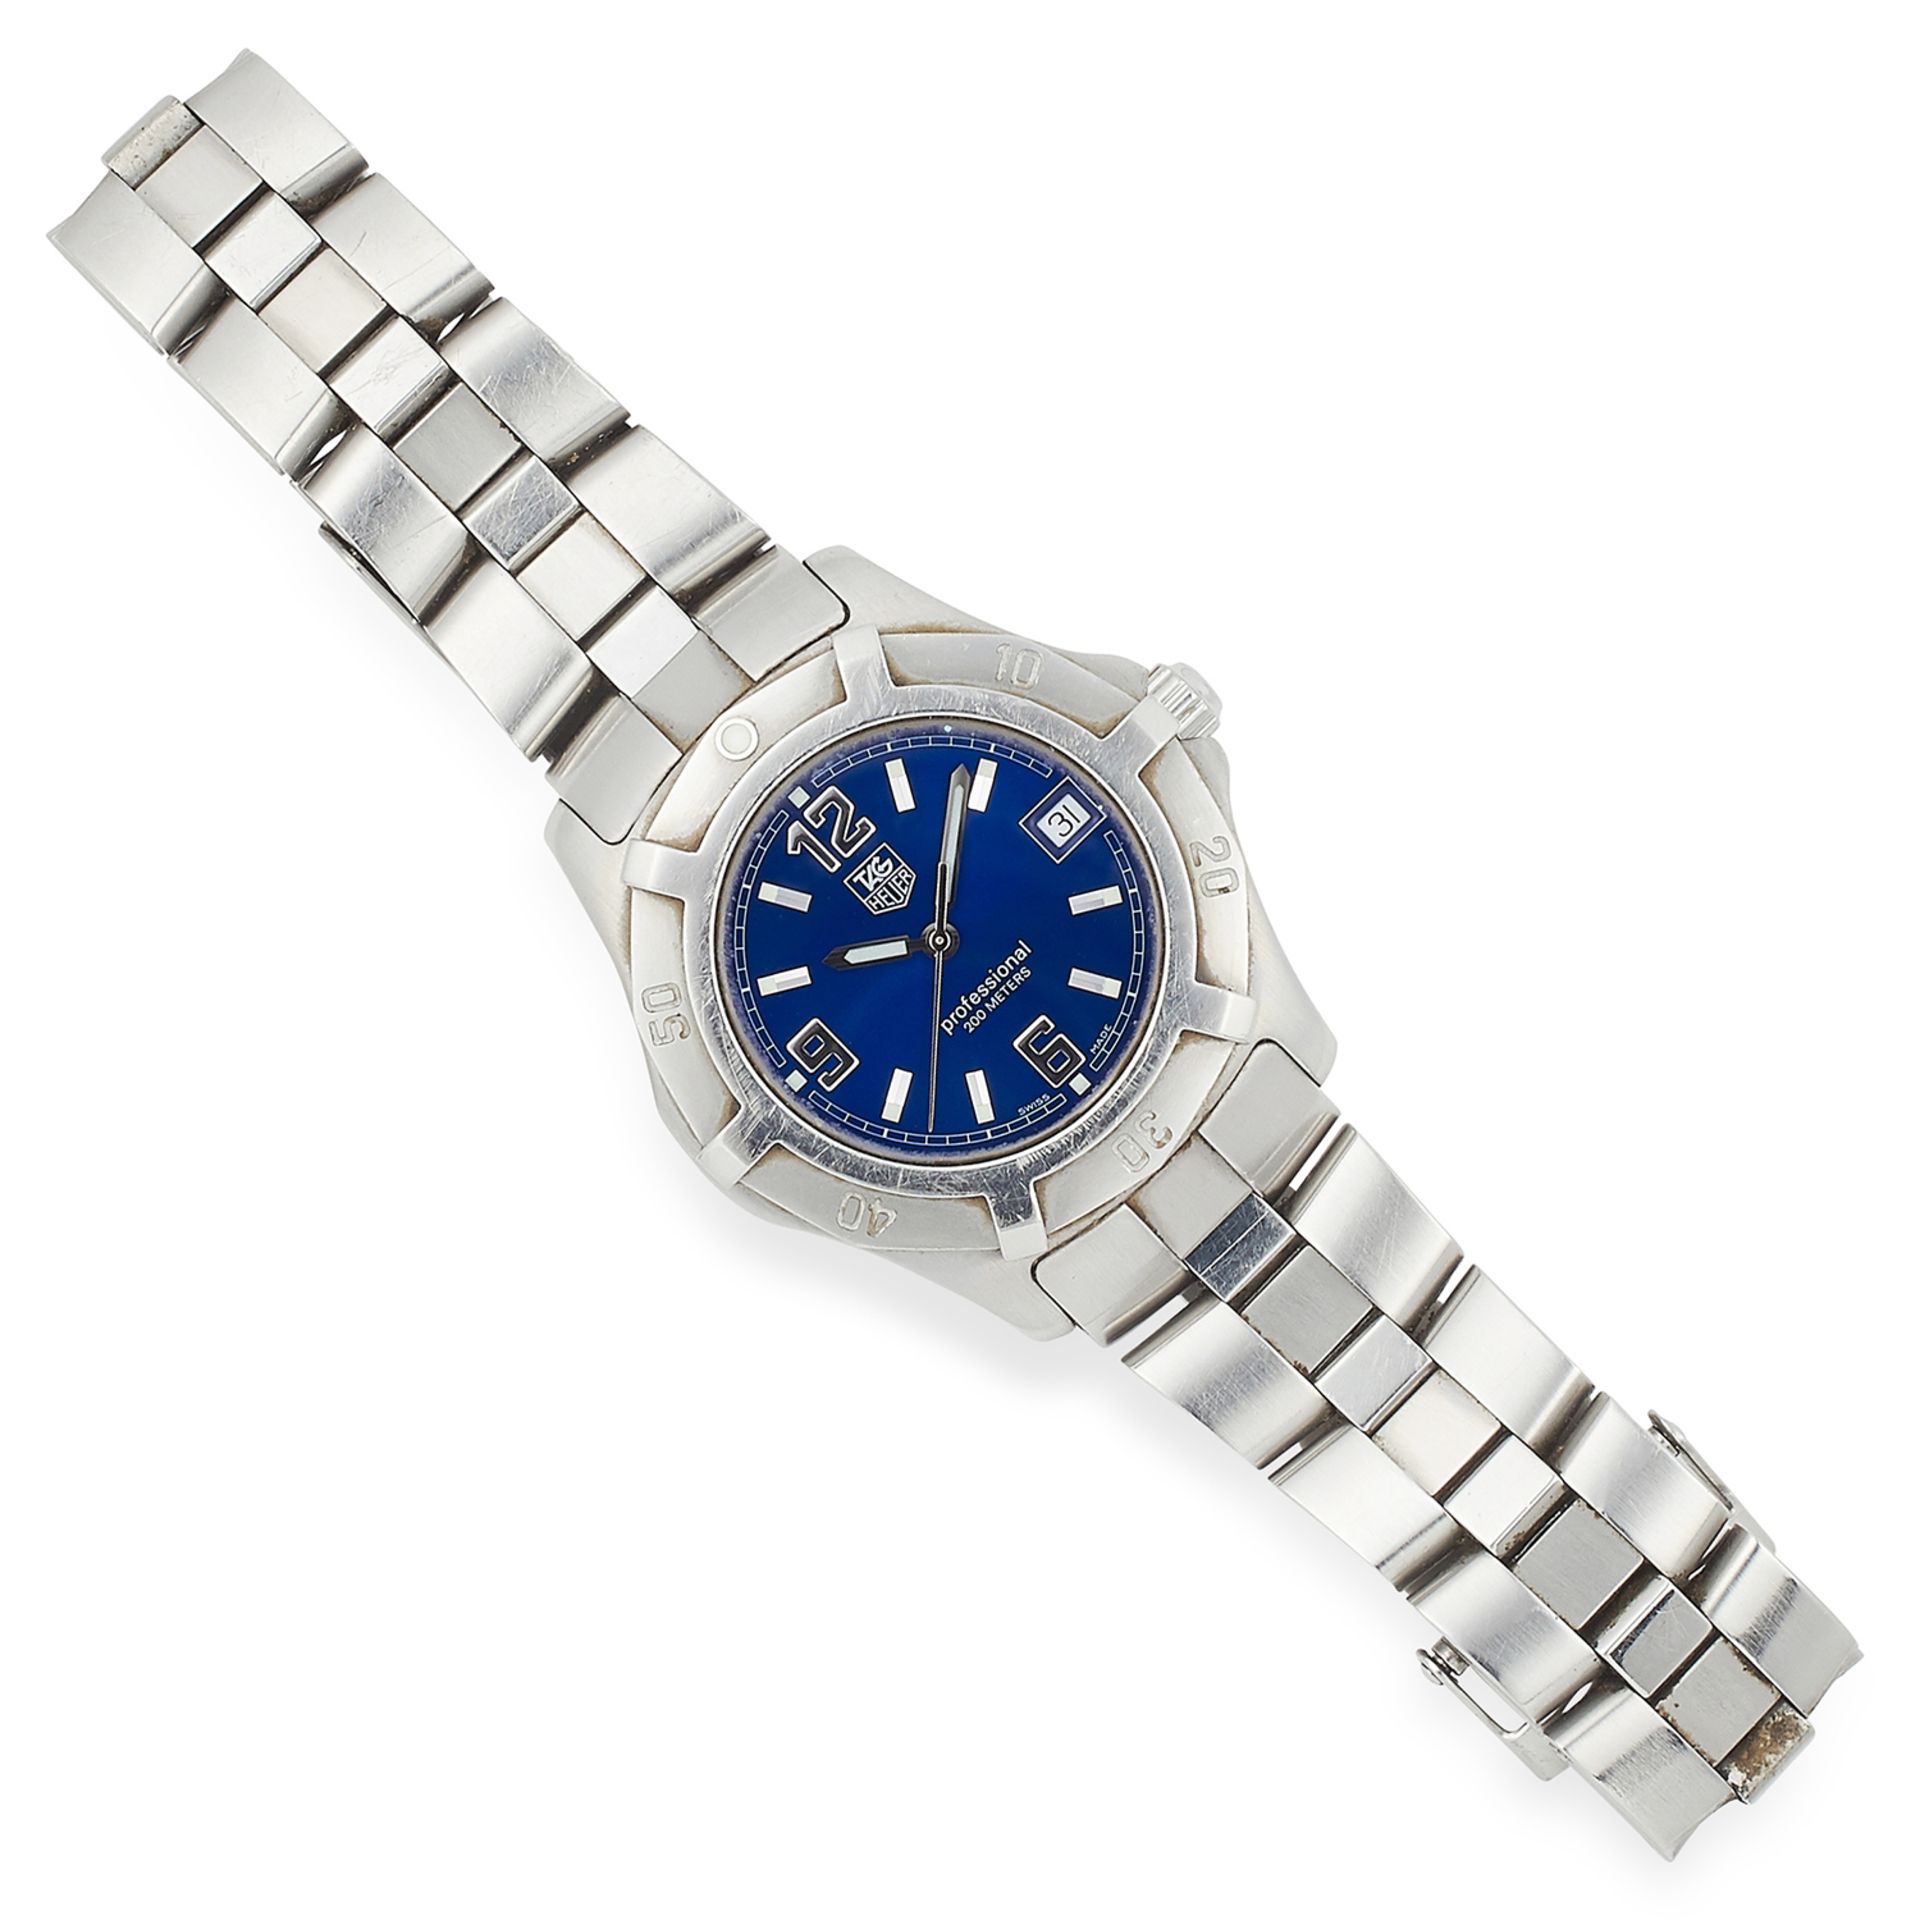 AQUARACER WRISTWATCH, TAG HEUER with blue dial, 132.3g.